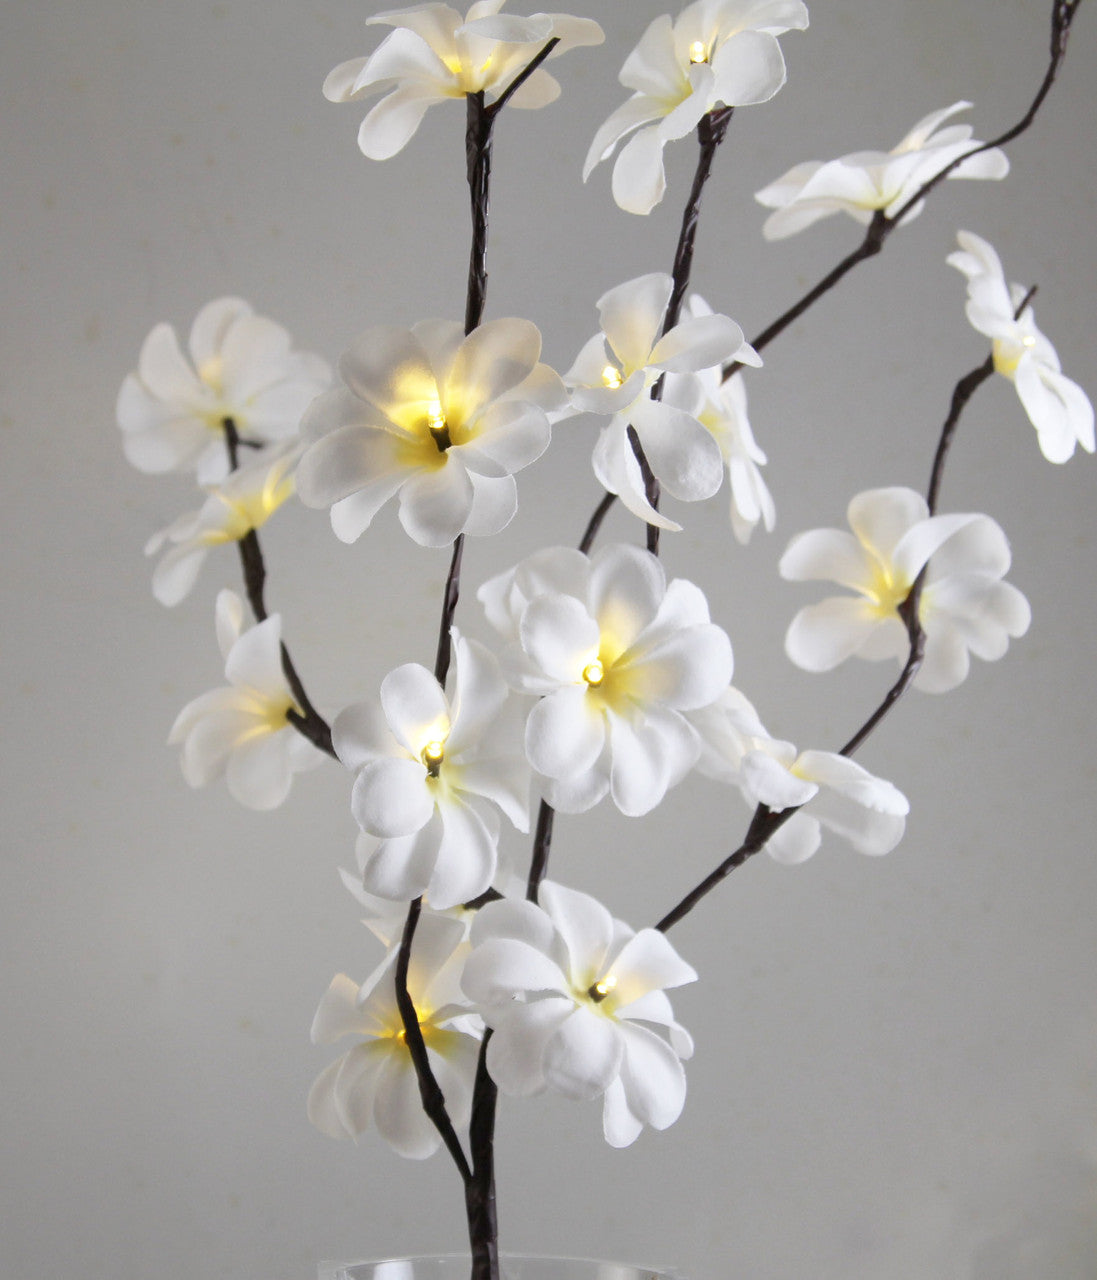 1 Set of 50cm H 20 LED White Frangipani Tree Branch Stem Fairy Light Wedding Event Party Function Table Vase Centrepiece Decoration - SILBERSHELL